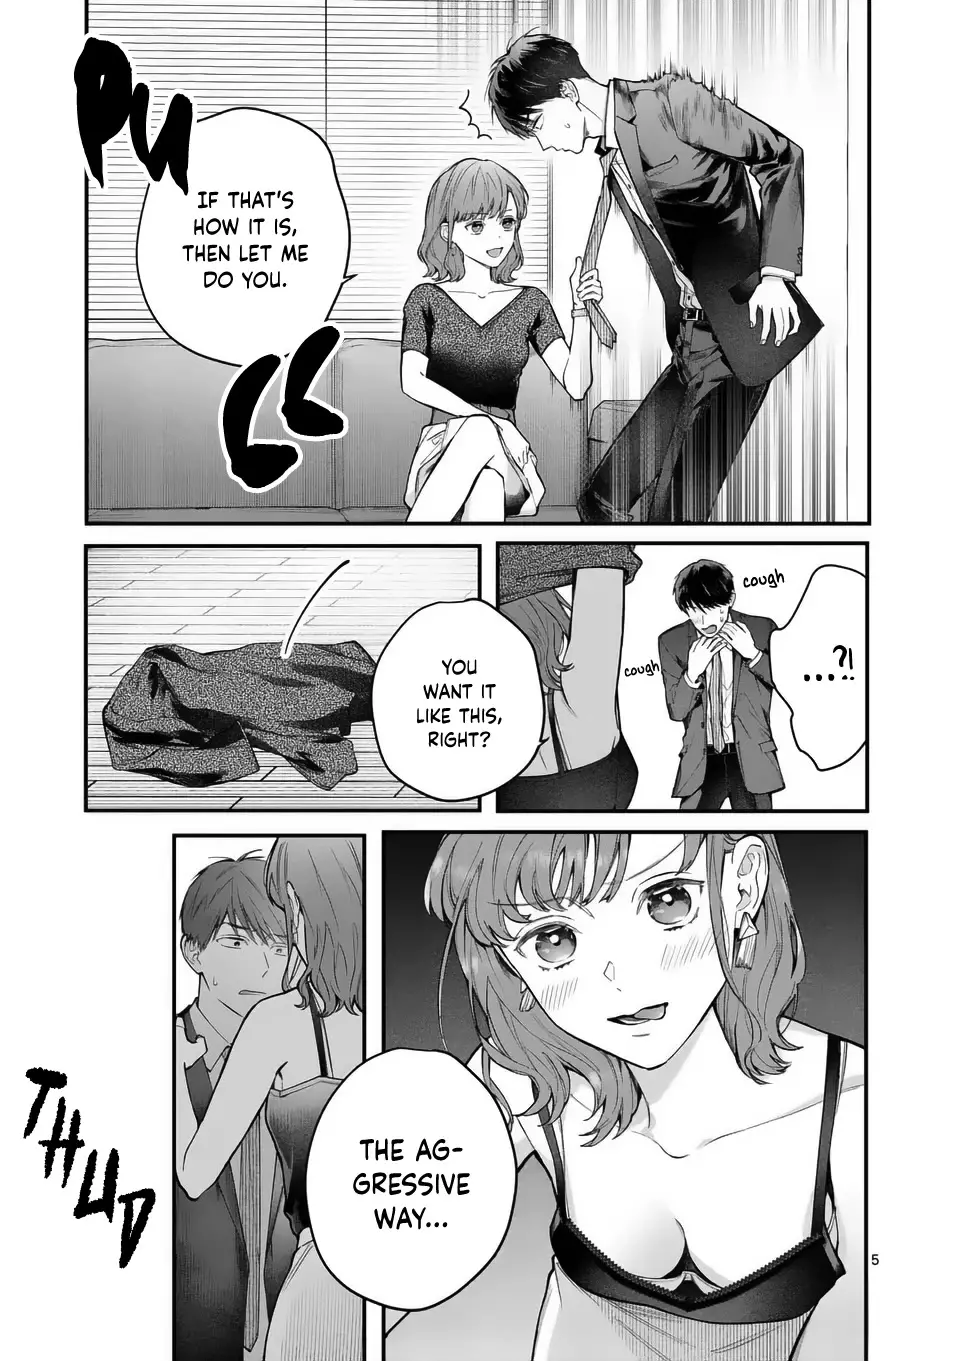 Is It Wrong To Get Done By A Girl? - 9 page 6